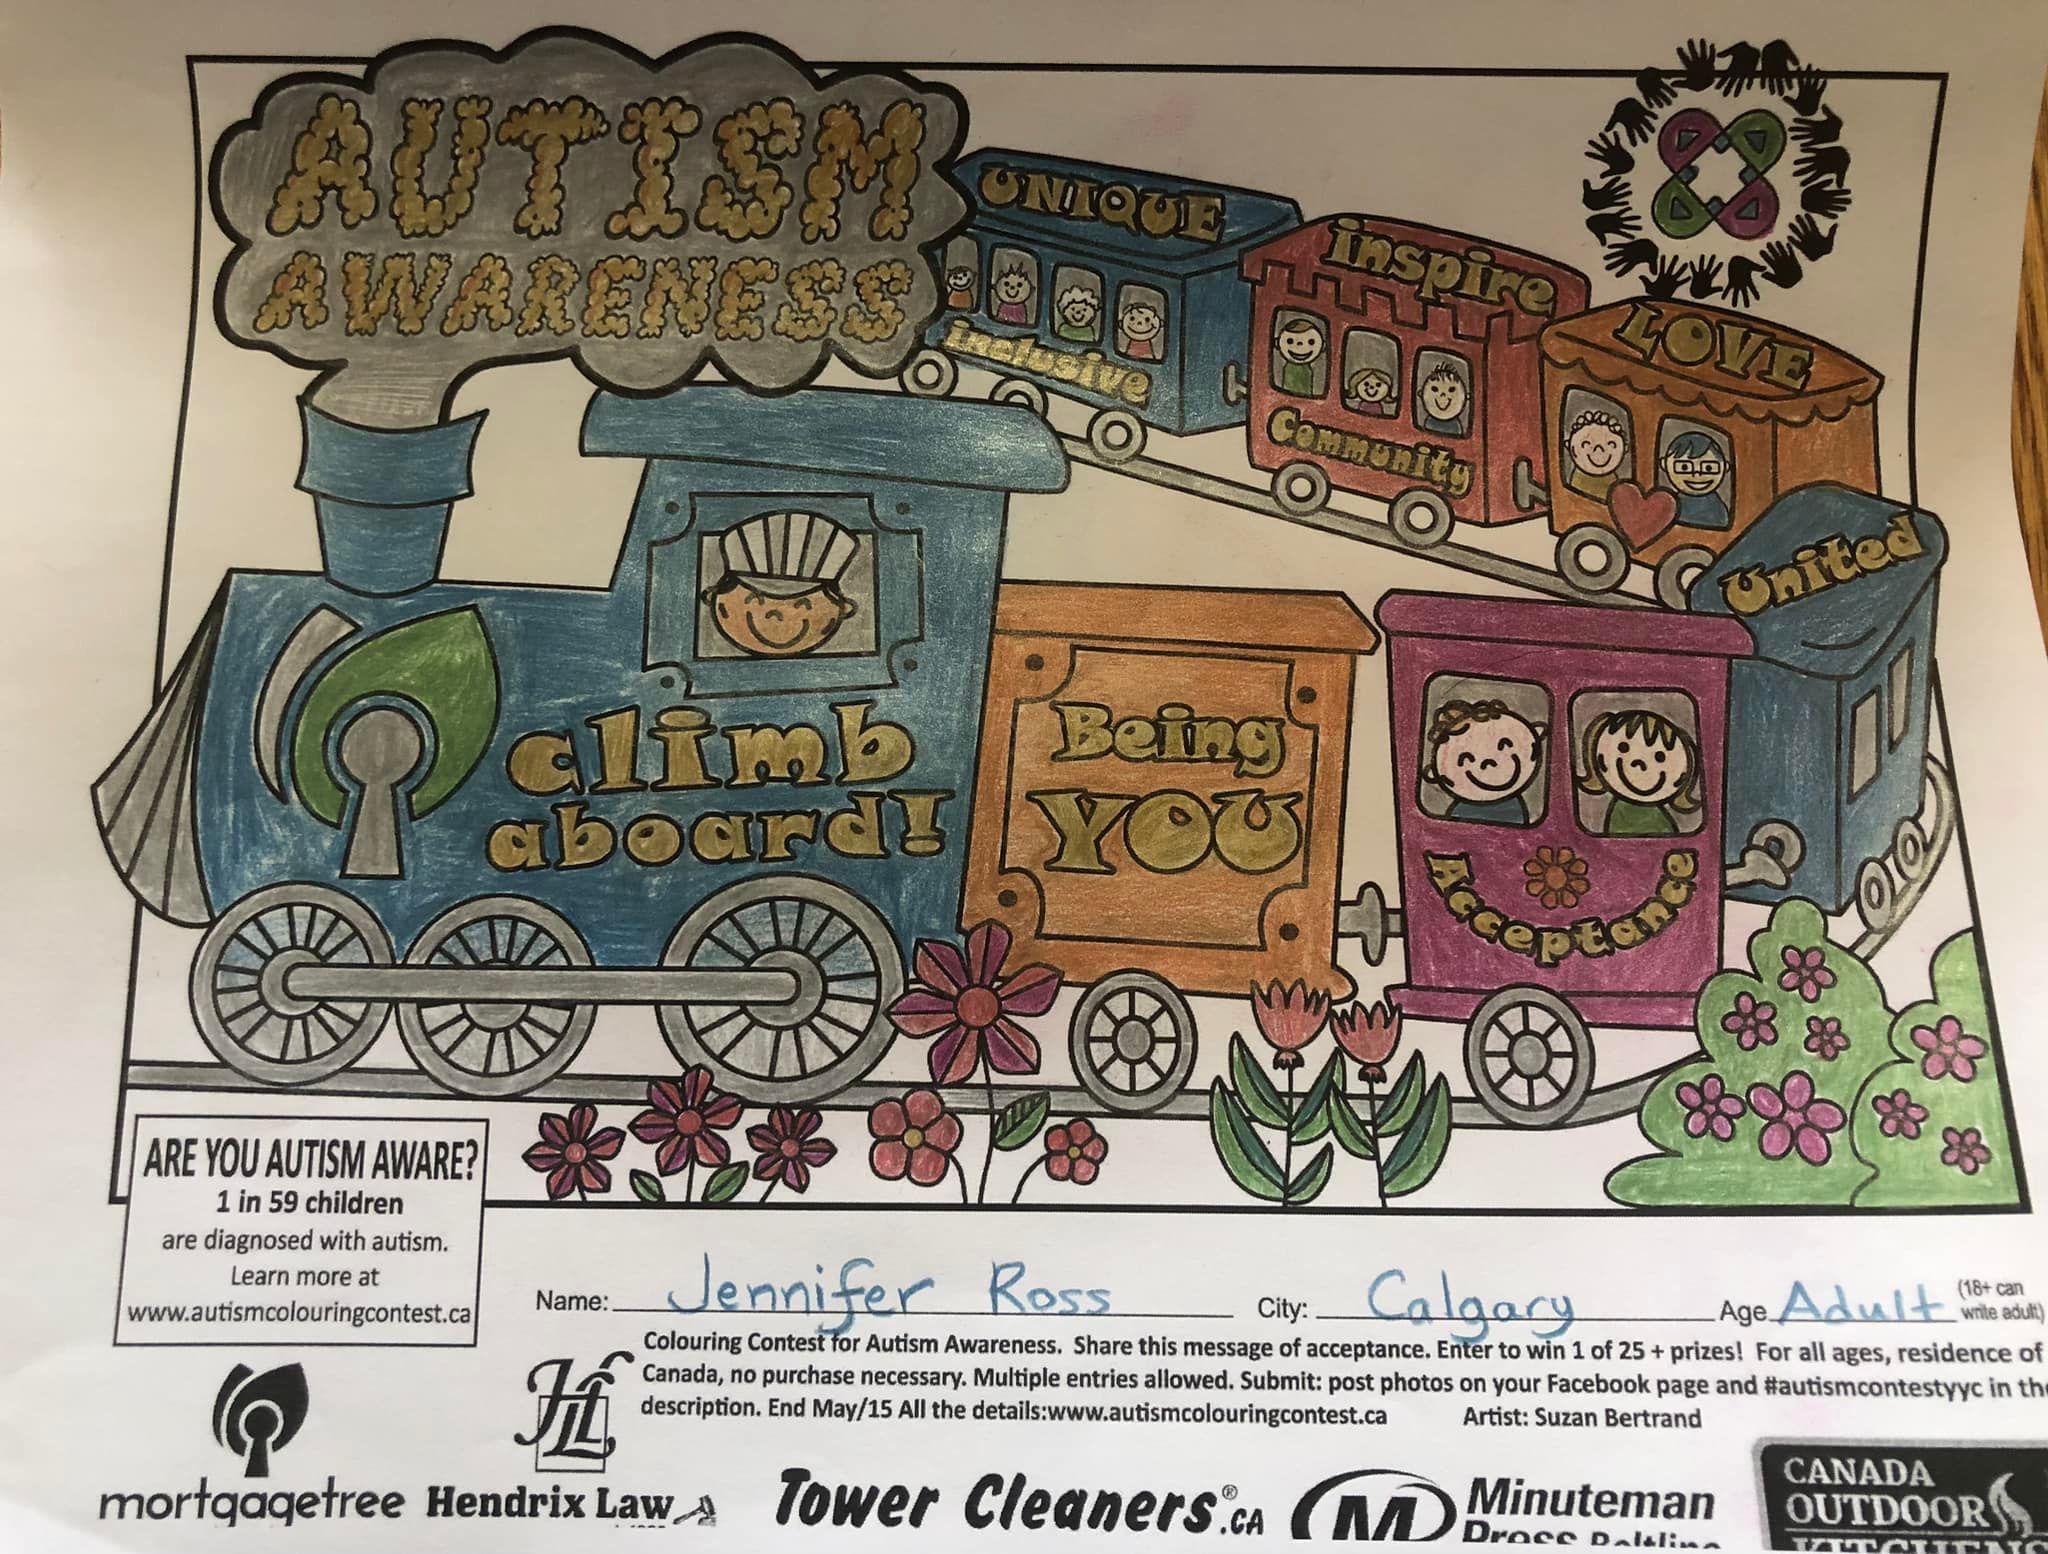 Download the Colouring Contest Poster